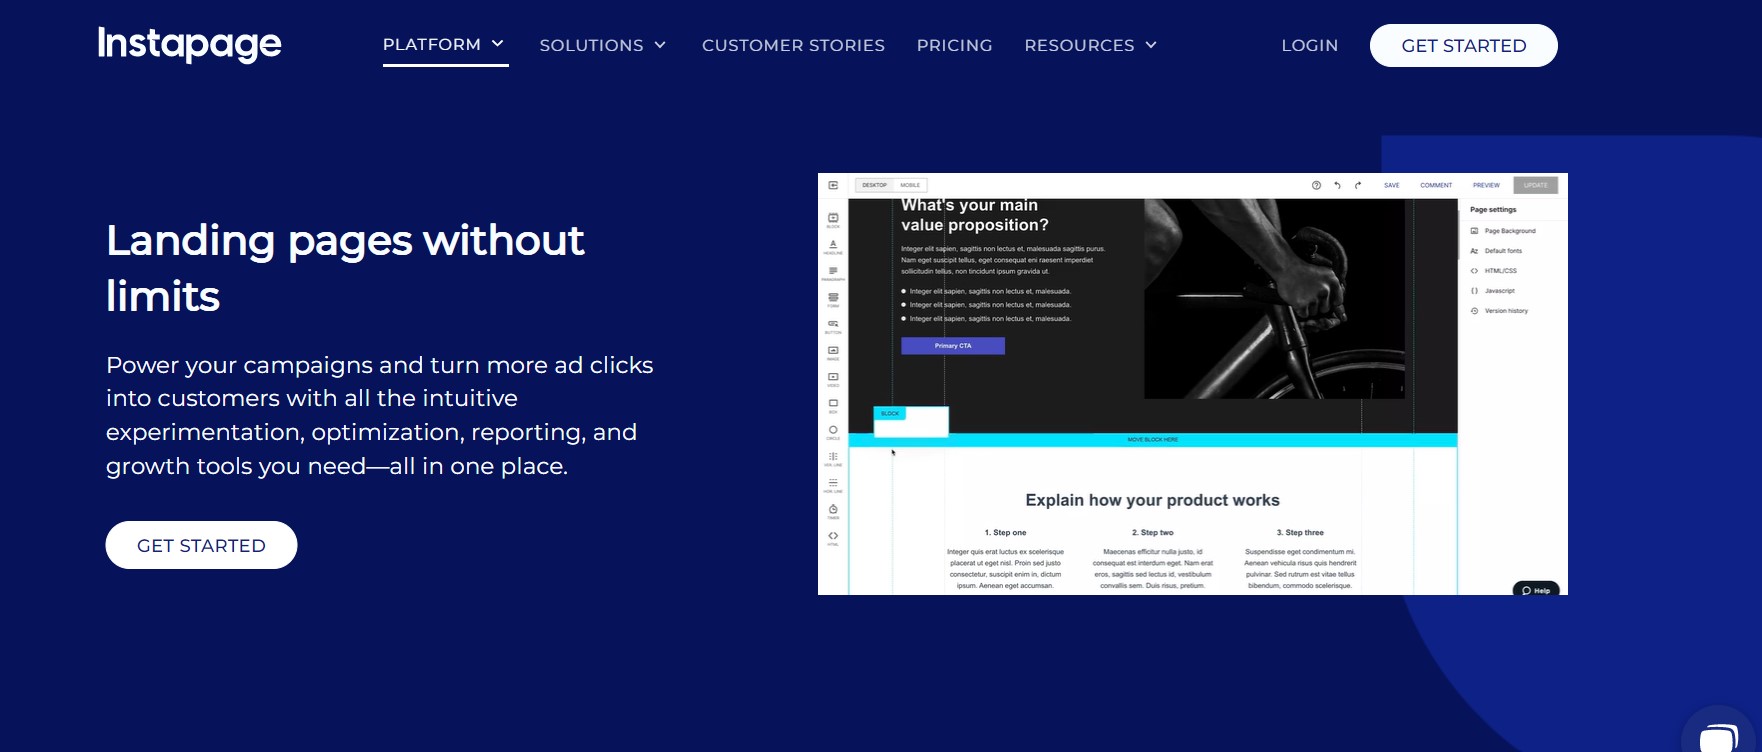 instapage homepage